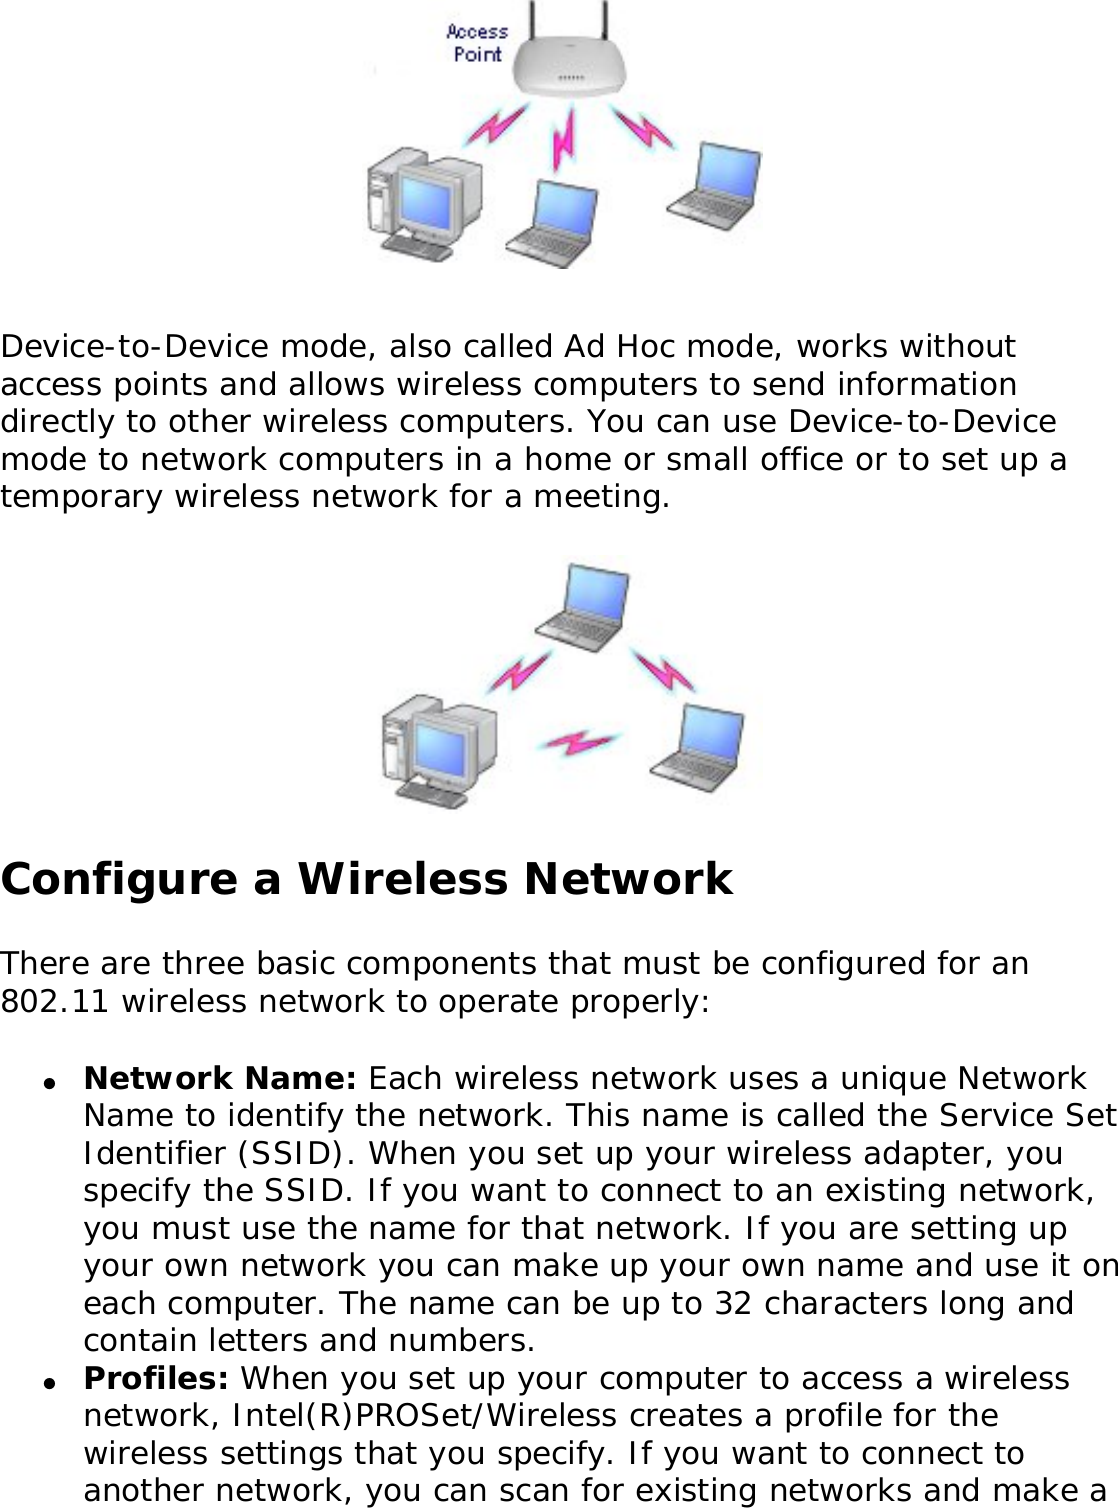 Device-to-Device mode, also called Ad Hoc mode, works without access points and allows wireless computers to send information directly to other wireless computers. You can use Device-to-Device mode to network computers in a home or small office or to set up a temporary wireless network for a meeting. Configure a Wireless NetworkThere are three basic components that must be configured for an 802.11 wireless network to operate properly: ●     Network Name: Each wireless network uses a unique Network Name to identify the network. This name is called the Service Set Identifier (SSID). When you set up your wireless adapter, you specify the SSID. If you want to connect to an existing network, you must use the name for that network. If you are setting up your own network you can make up your own name and use it on each computer. The name can be up to 32 characters long and contain letters and numbers.●     Profiles: When you set up your computer to access a wireless network, Intel(R)PROSet/Wireless creates a profile for the wireless settings that you specify. If you want to connect to another network, you can scan for existing networks and make a 